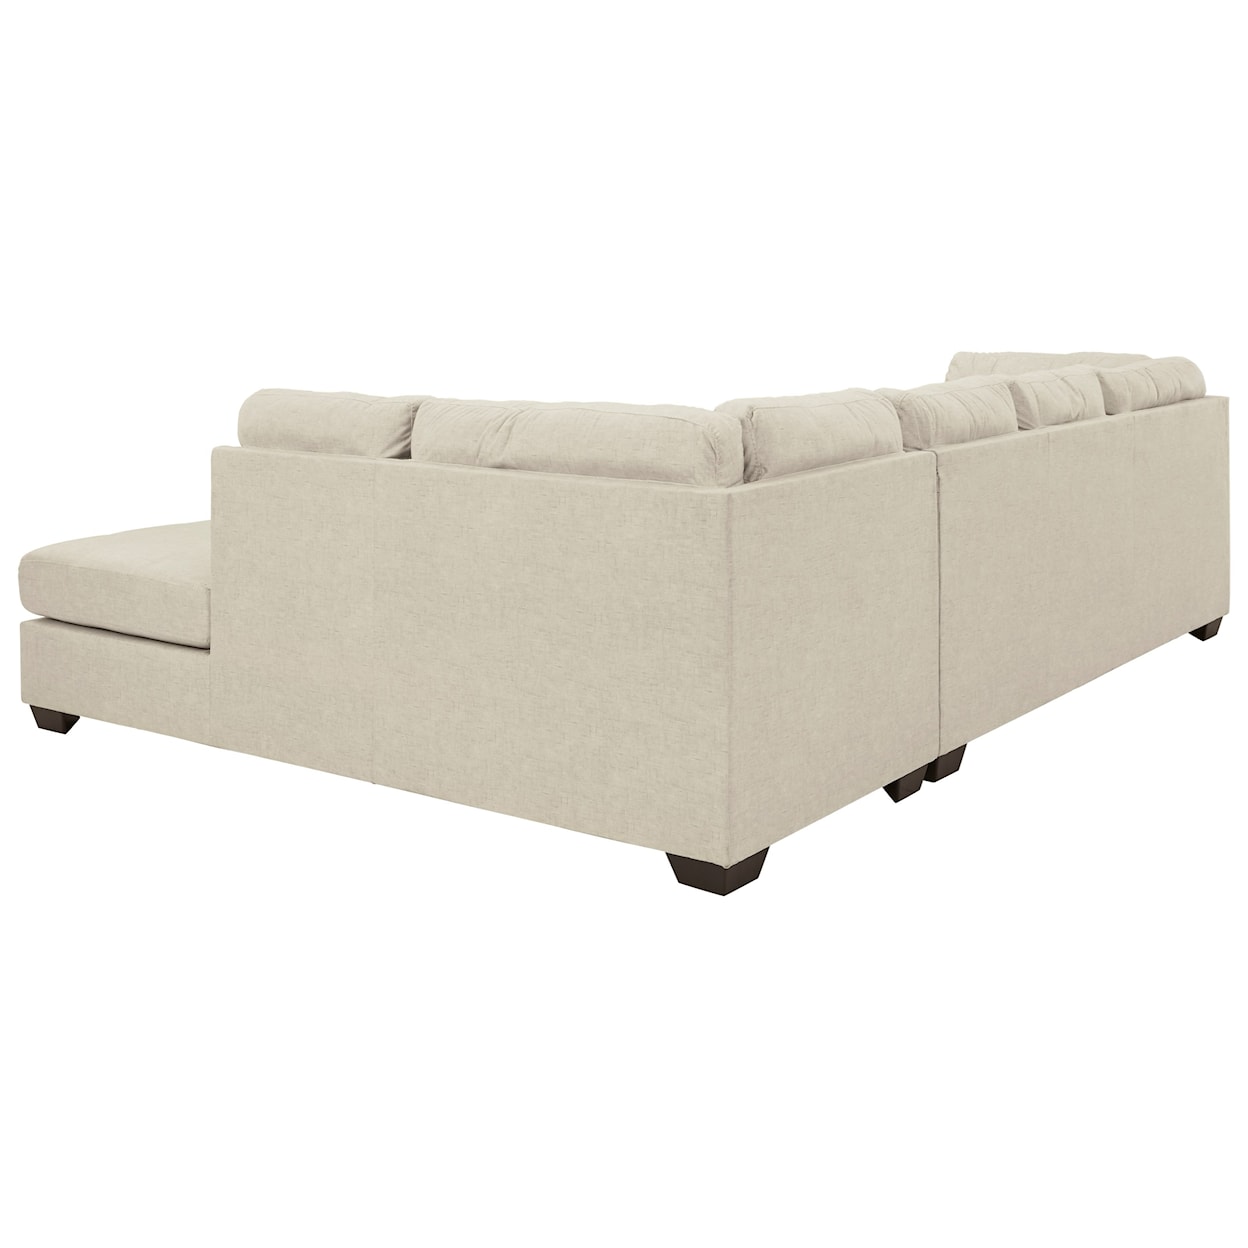 Ashley Furniture Benchcraft Falkirk 2-Piece Sectional with Chaise